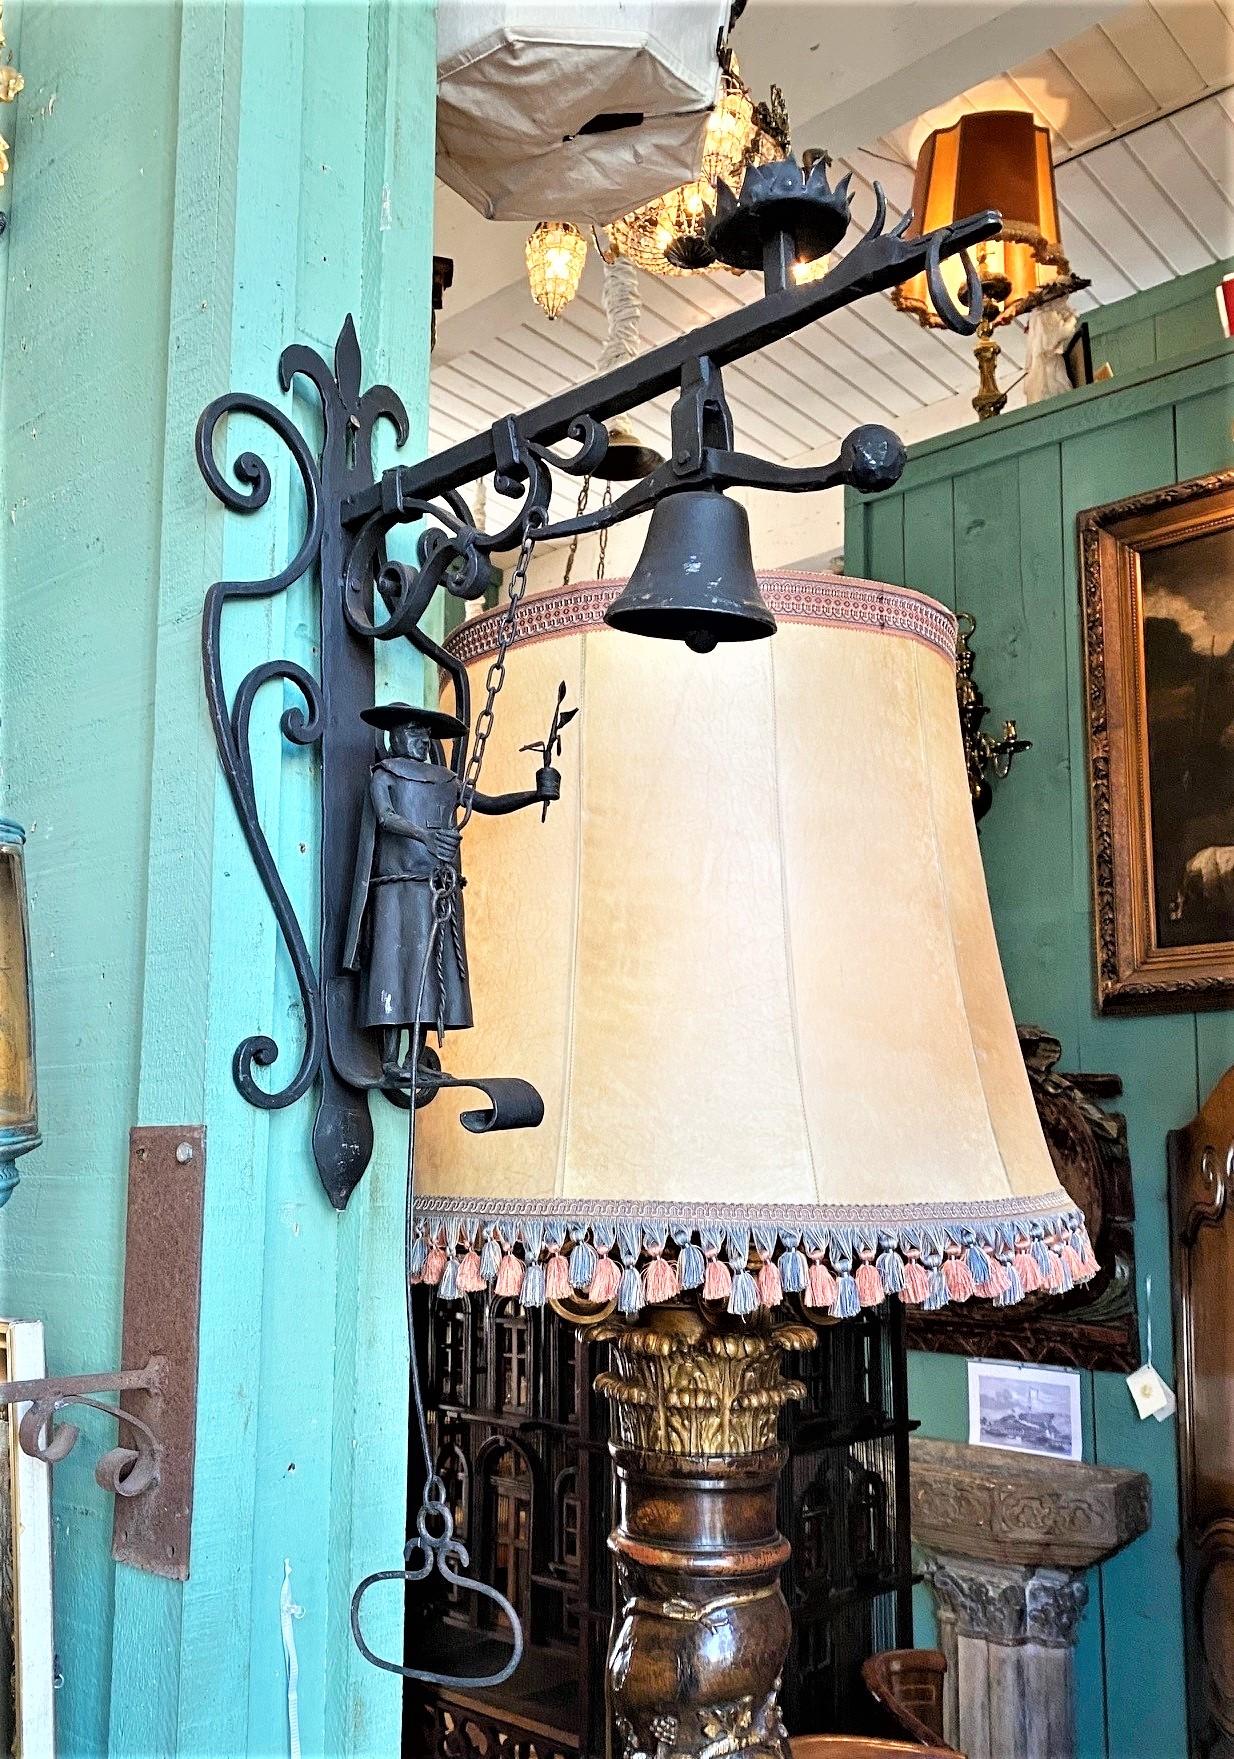 Measures: Height all the way to the handle is 33” the main body of the item itself is 24” width approx. 10 inches and depth 19 inches. A fun garden bell or doorbell wall mount bracket hand made 20th century hand crafted wrought iron entry wall mount